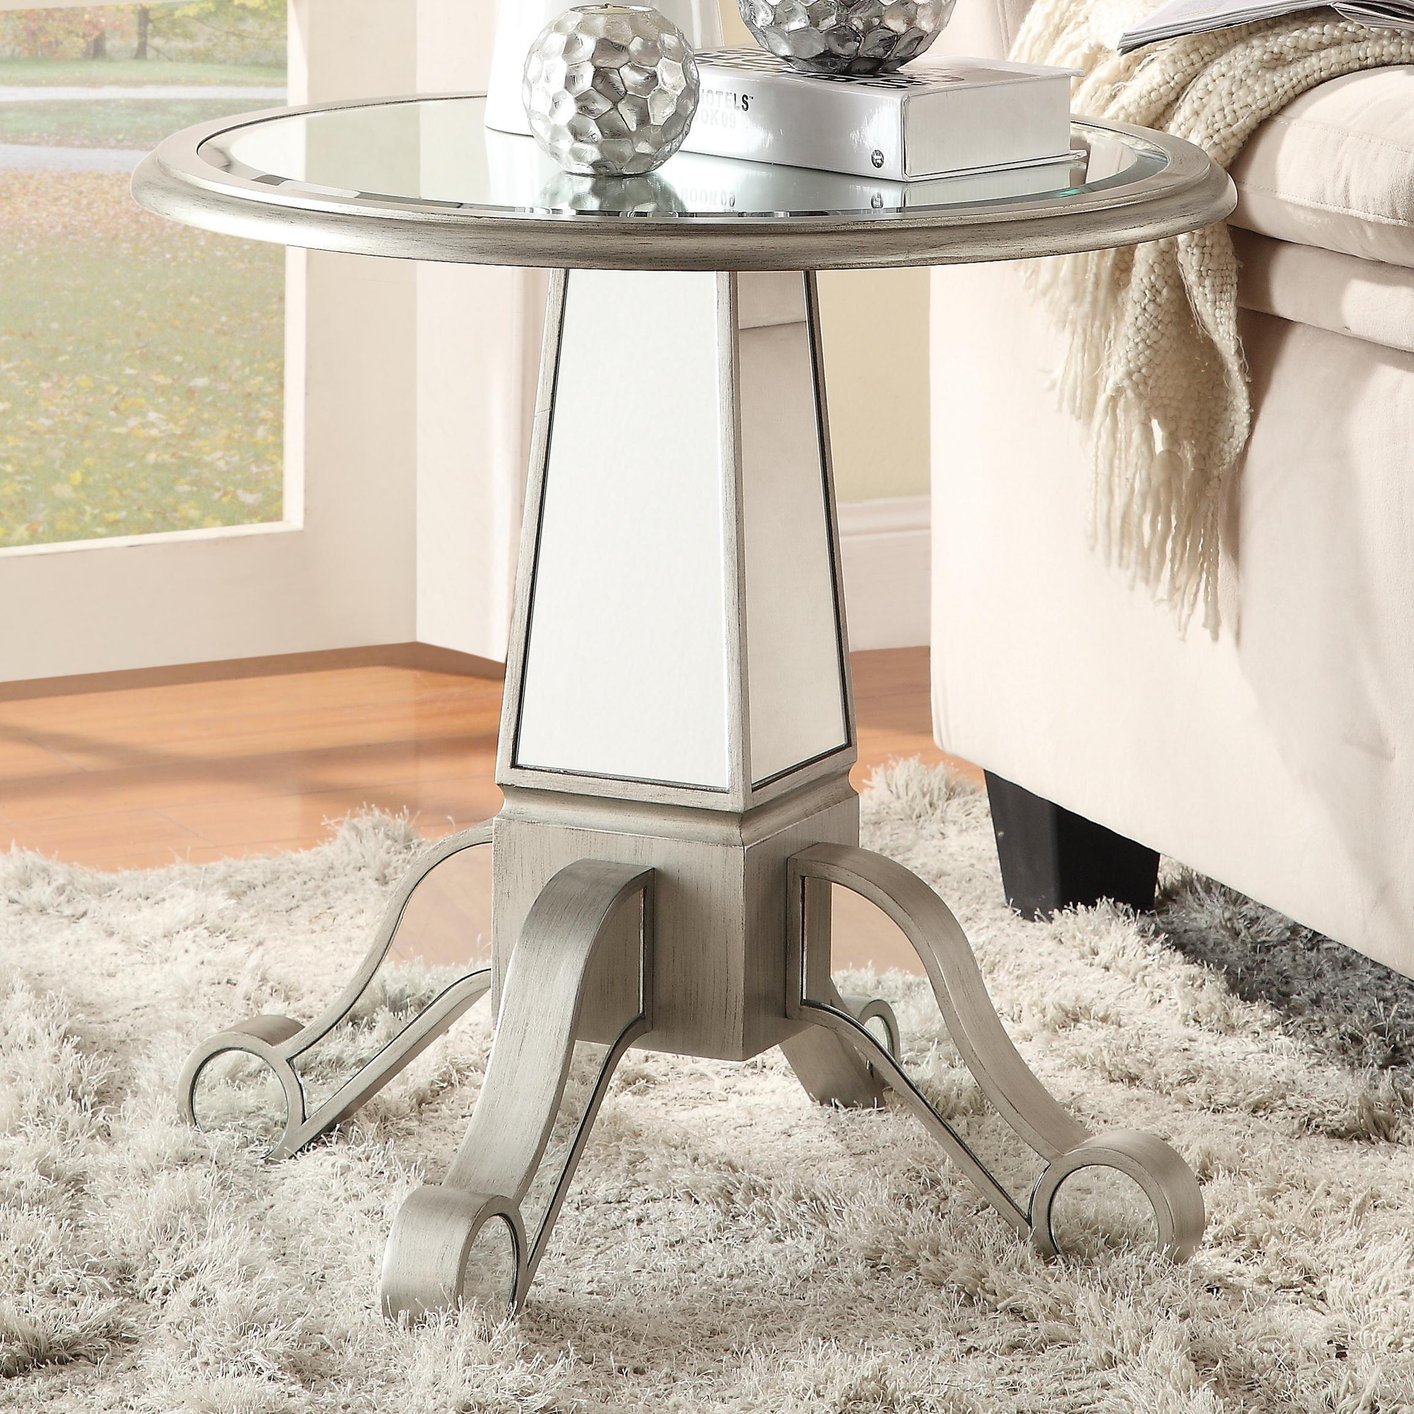 silver metal accent table steal sofa furniture los angeles glass end with mirror meyda tiffany lighting white bedside tables kmart bunnings coffee blow mattress target old kitchen